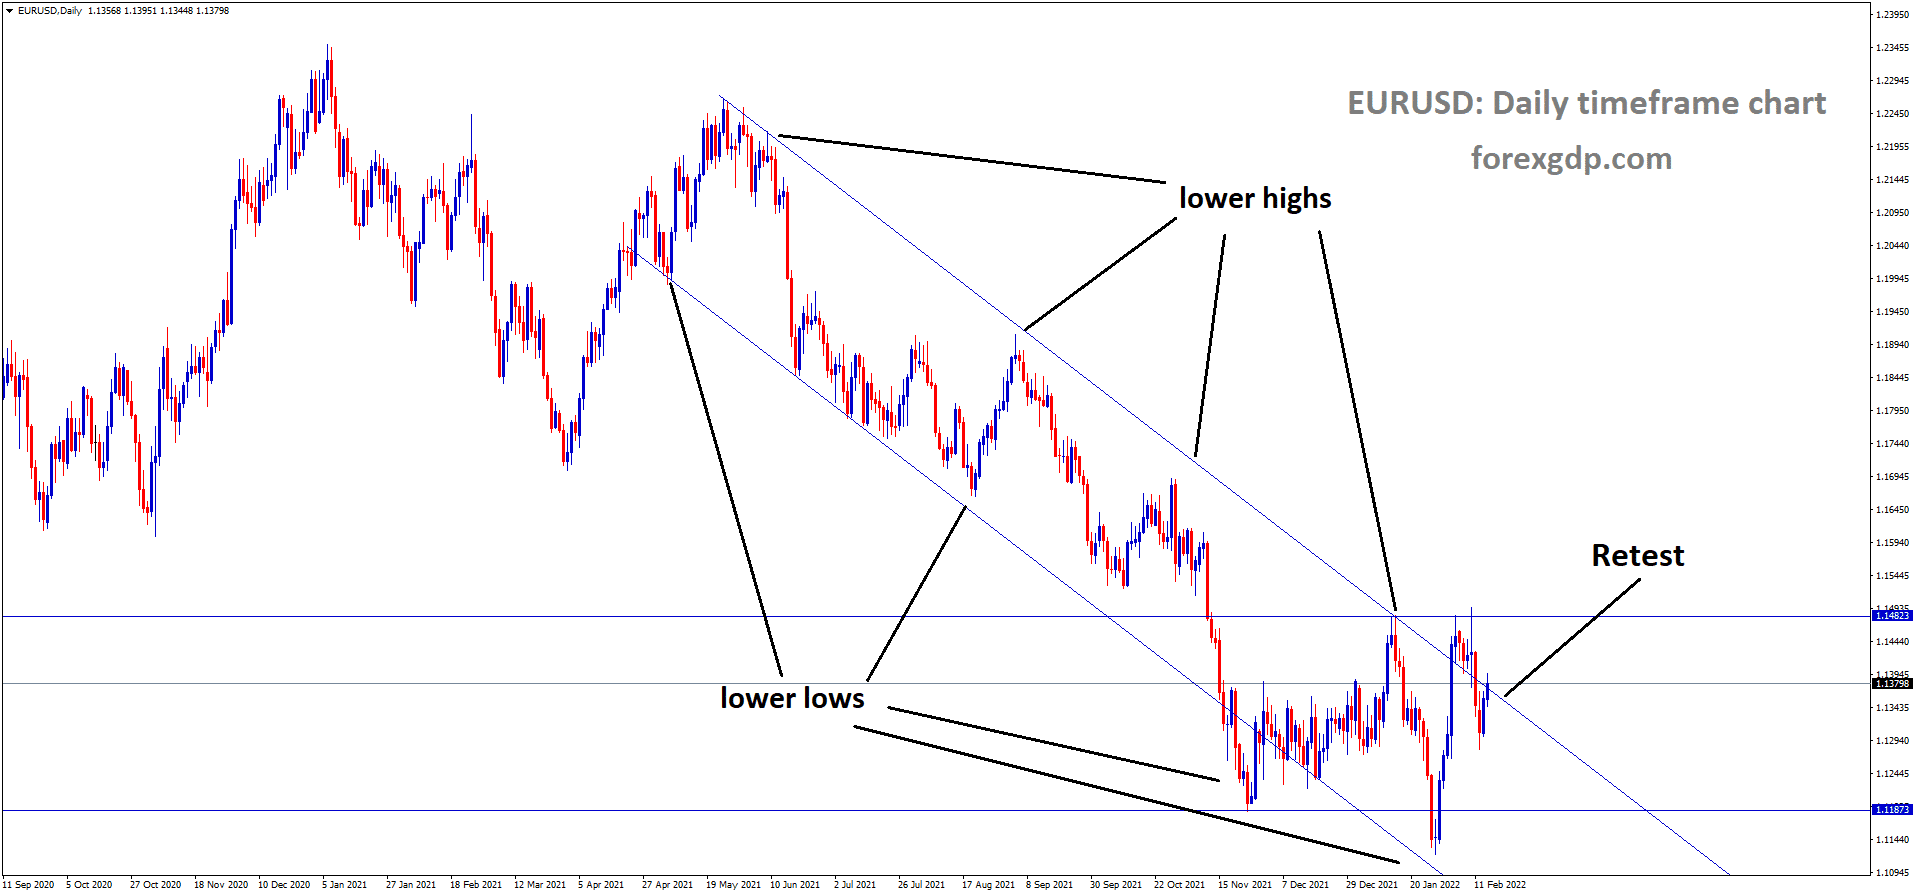 EURUSD is moving in the Descending channel and the market has retested the lower high area of the channel